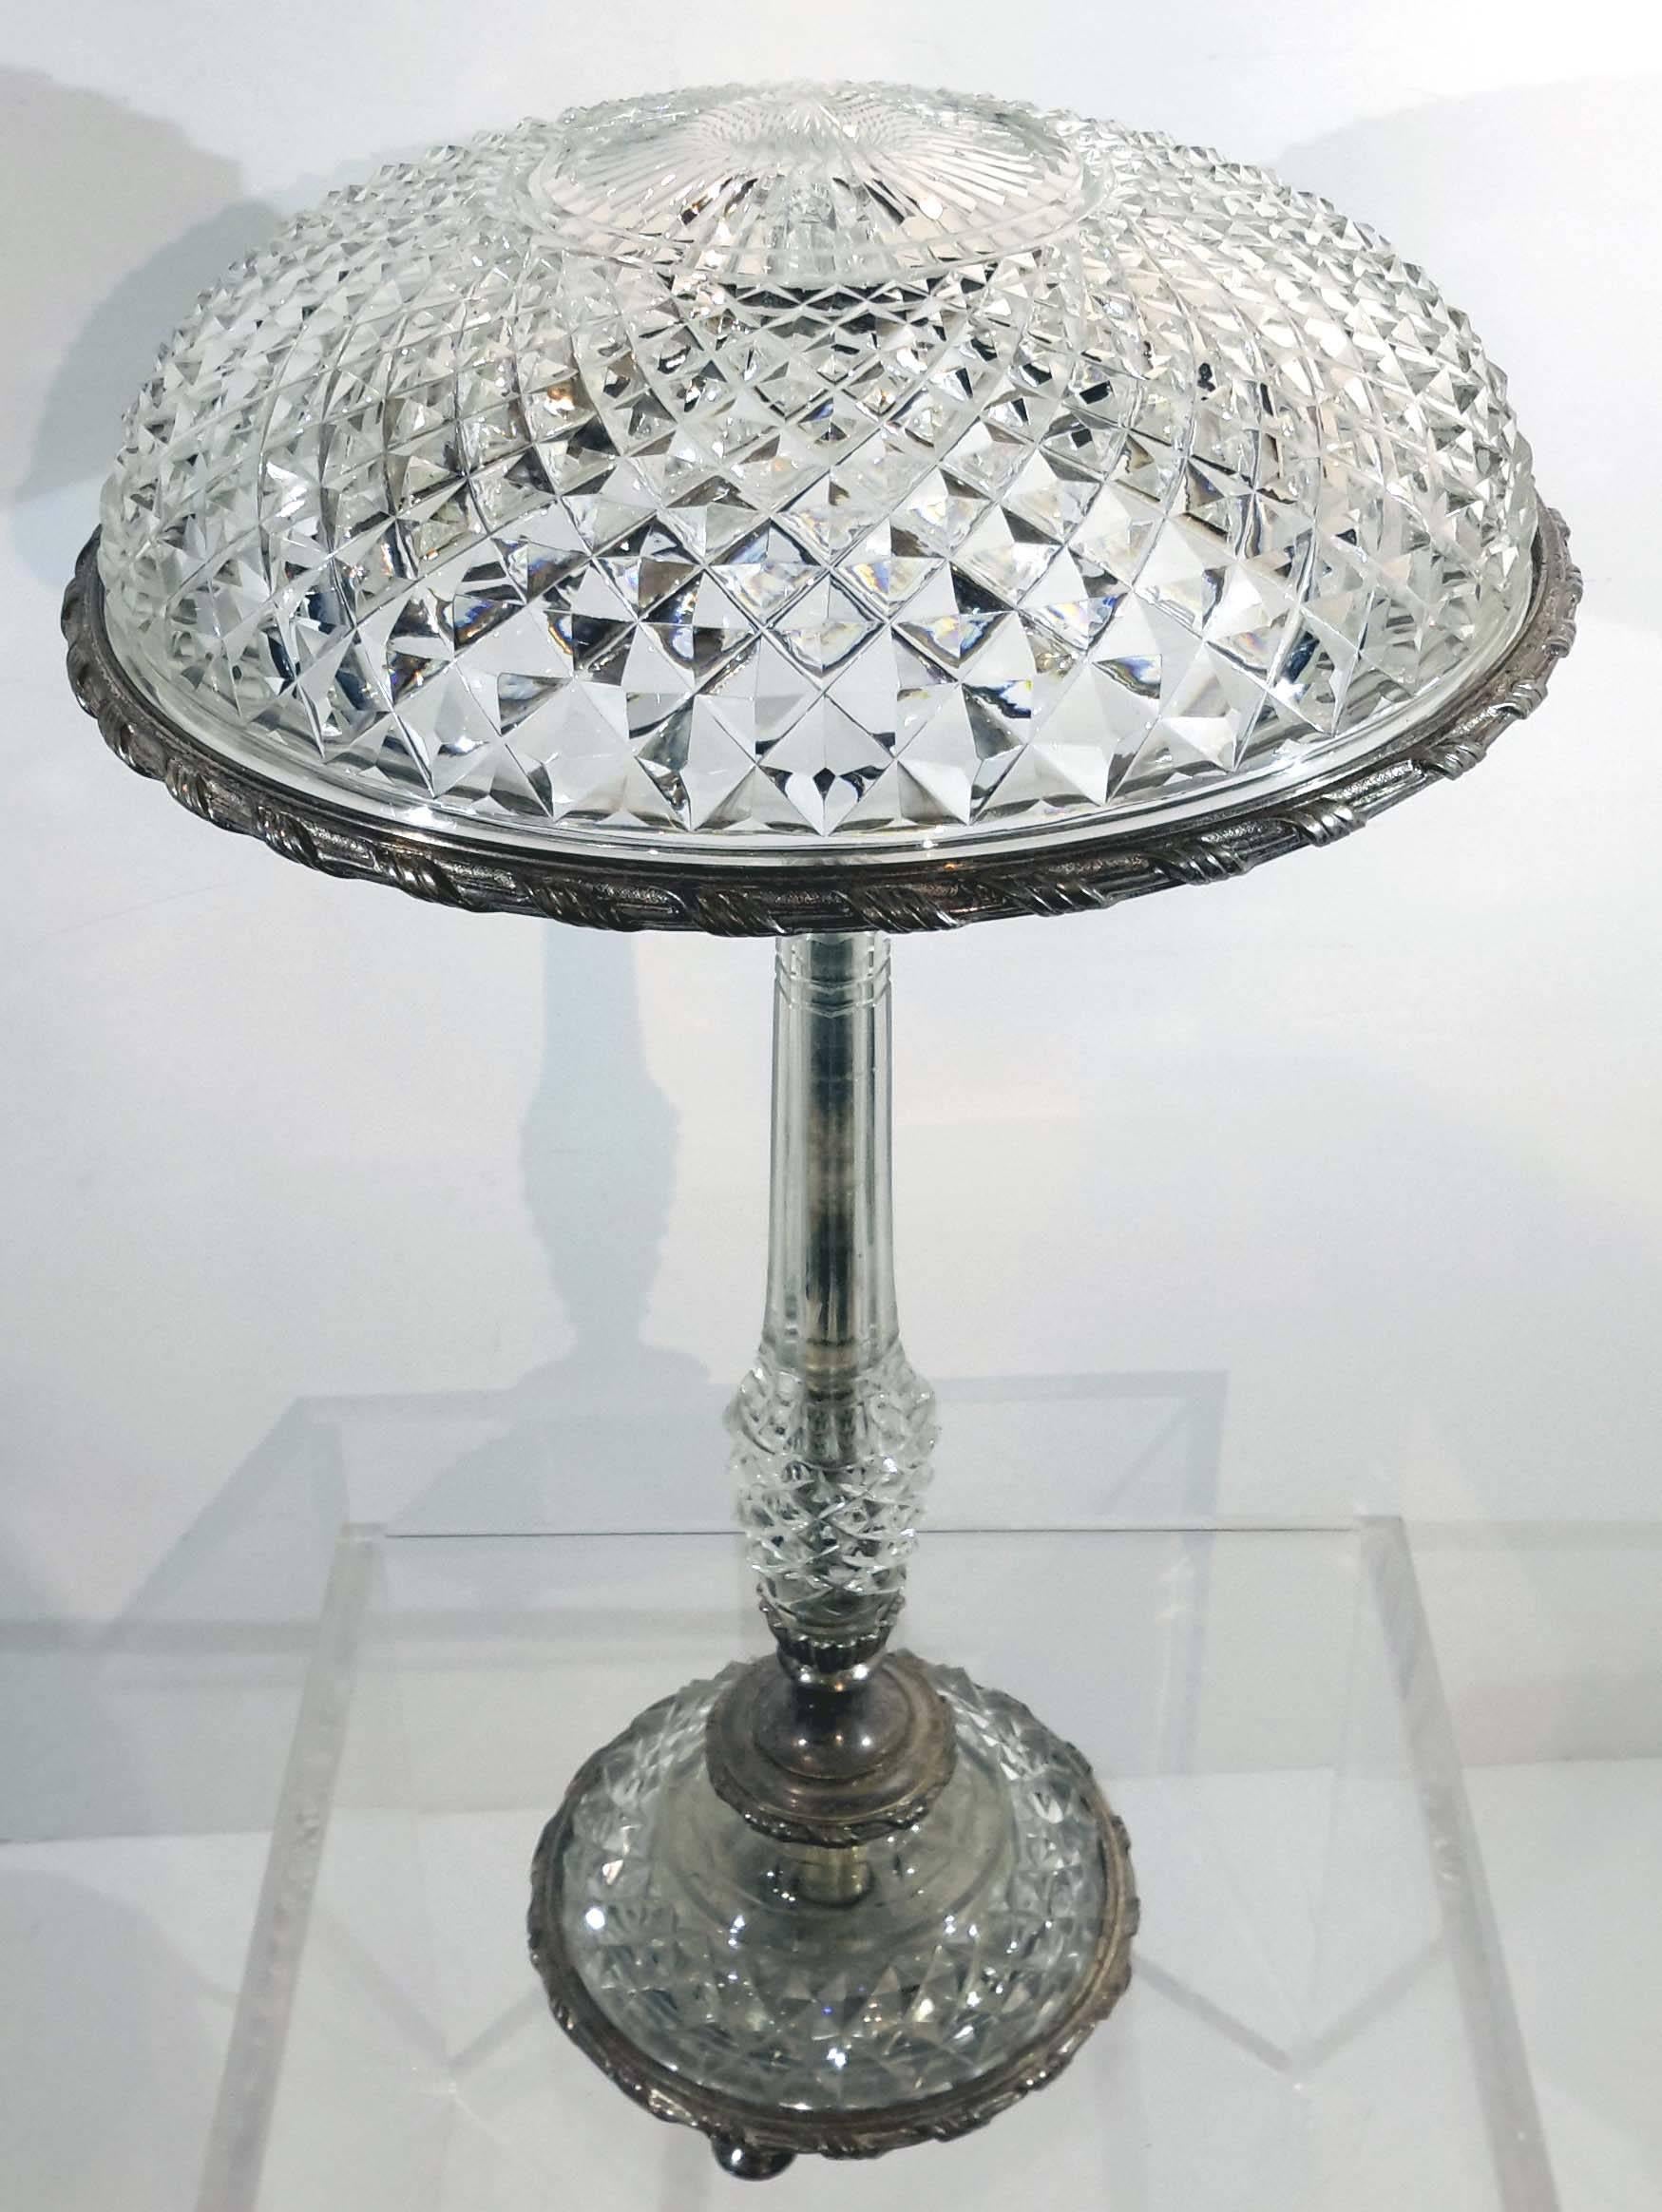 Great quality cut crystal and good cast and silver plated bronze.
Possibly French.